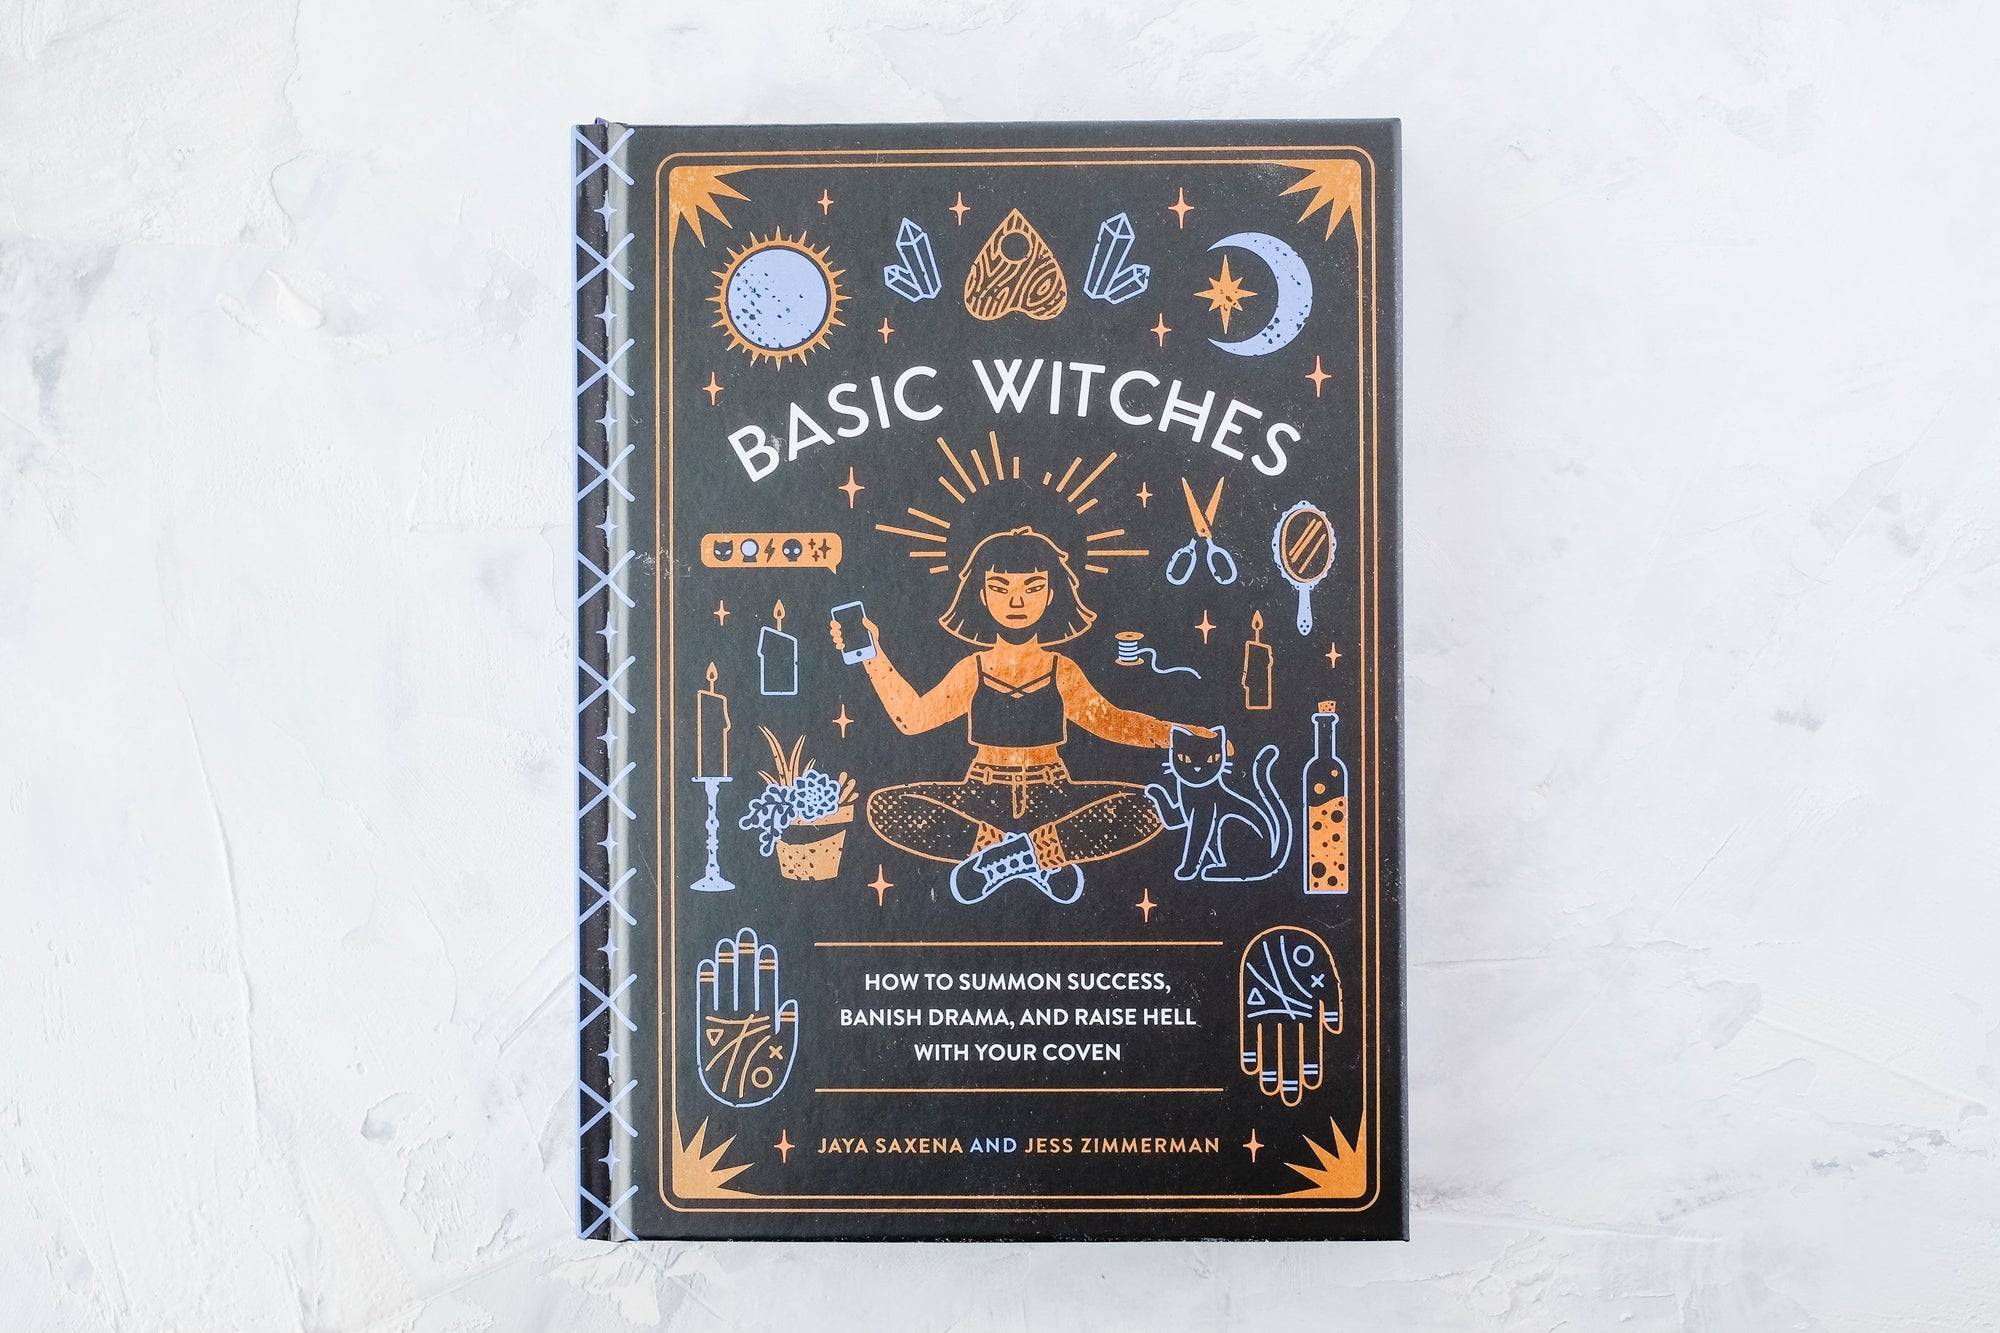 Basic Witches Book - Catalyst & Co